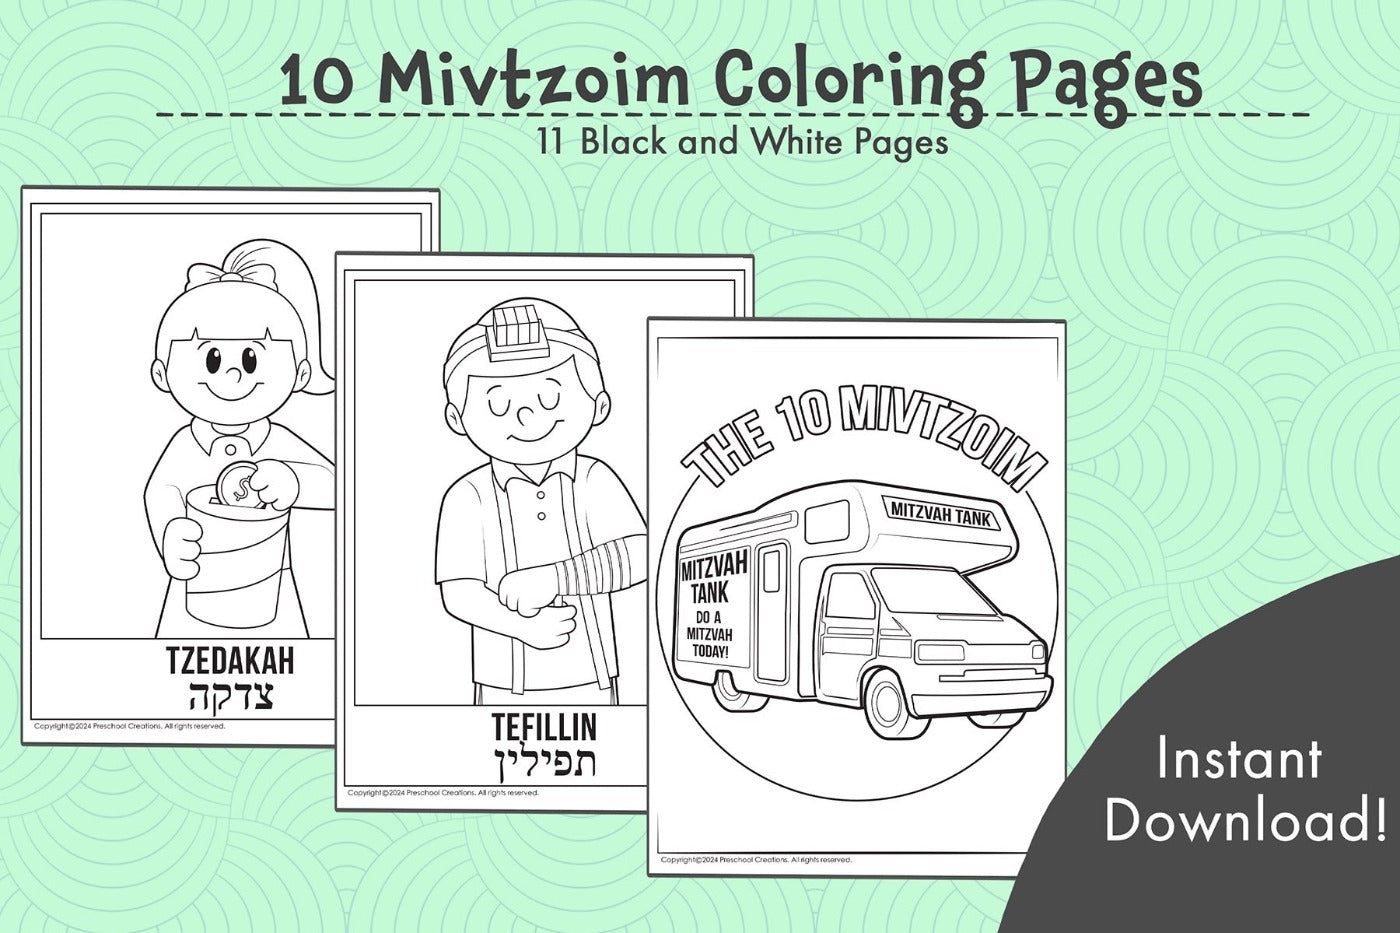 Coloring pages for your students or family to enjoy, depicting the 10 Mivtzoim / the 10 mitzvah campaigns initiated by the Lubavitcher Rebbe.  Bring the spirit of the Rebbe's 10 mitzvah campaigns into your classroom and home with our 10 Mivtzoim coloring book. These eye-catching drawings serve as a daily reminder to fulfill these important mitzvot and spread awareness of these mitzvos to bring Moshiach now! 